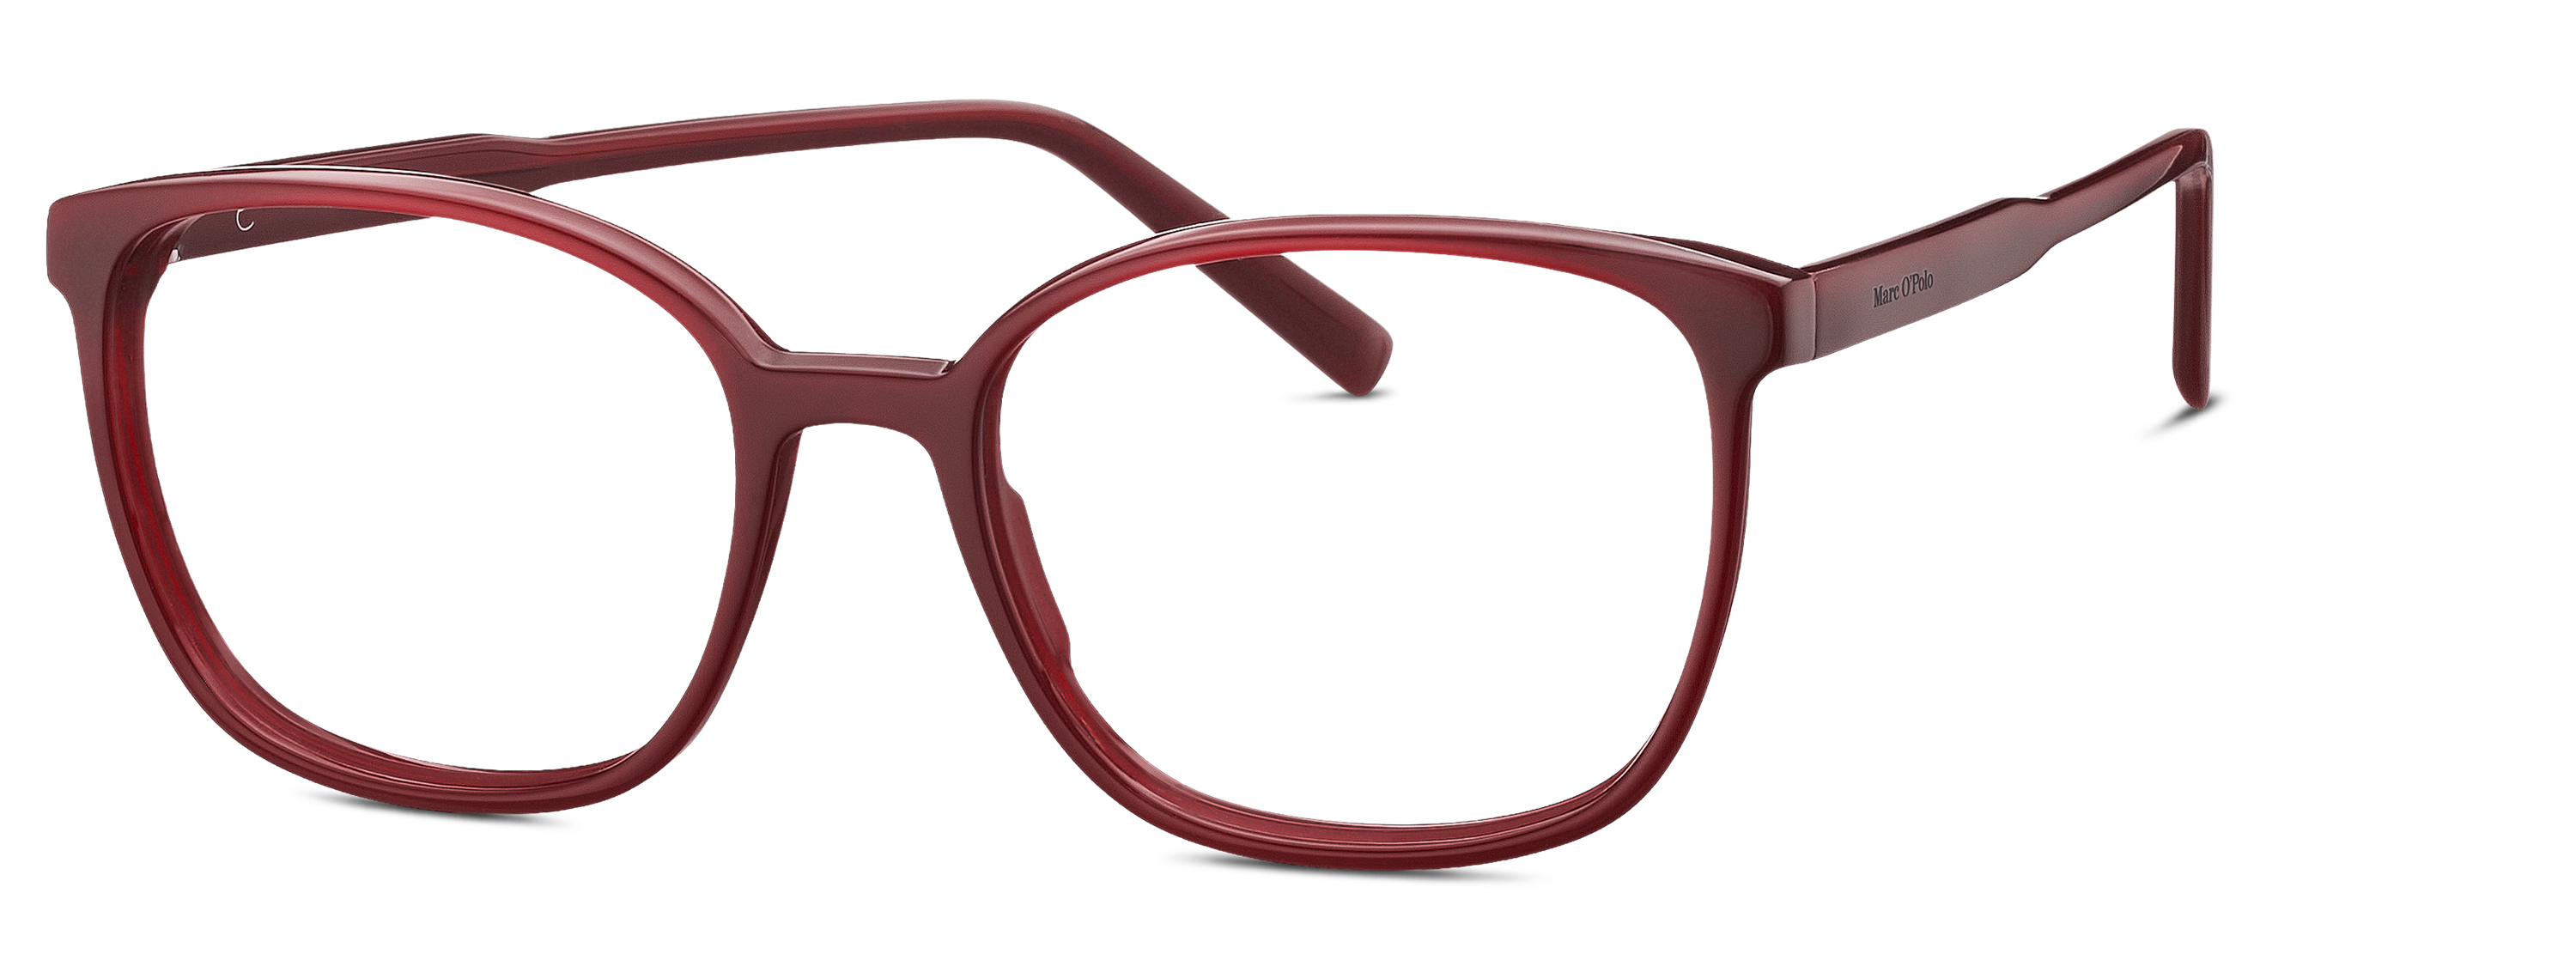 Front MARC O'POLO Eyewear 503207 50 Brille Rot, Transparent